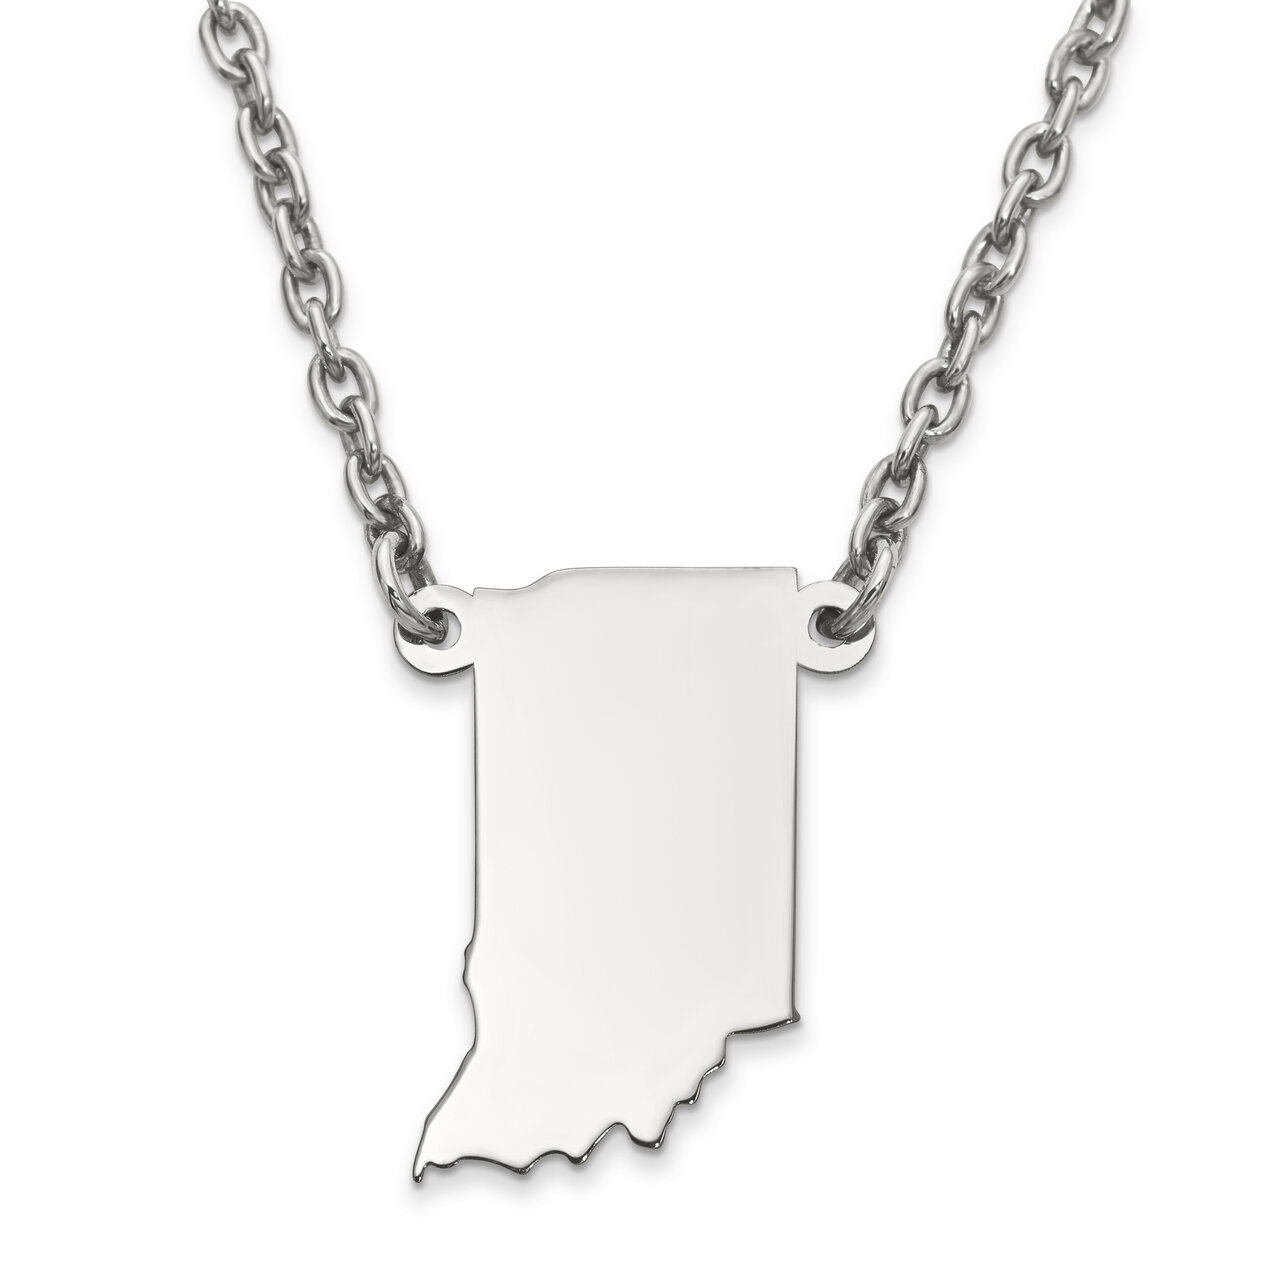 Indiana State Pendant Necklace with Chain Sterling Silver Engravable XNA706SS-IN